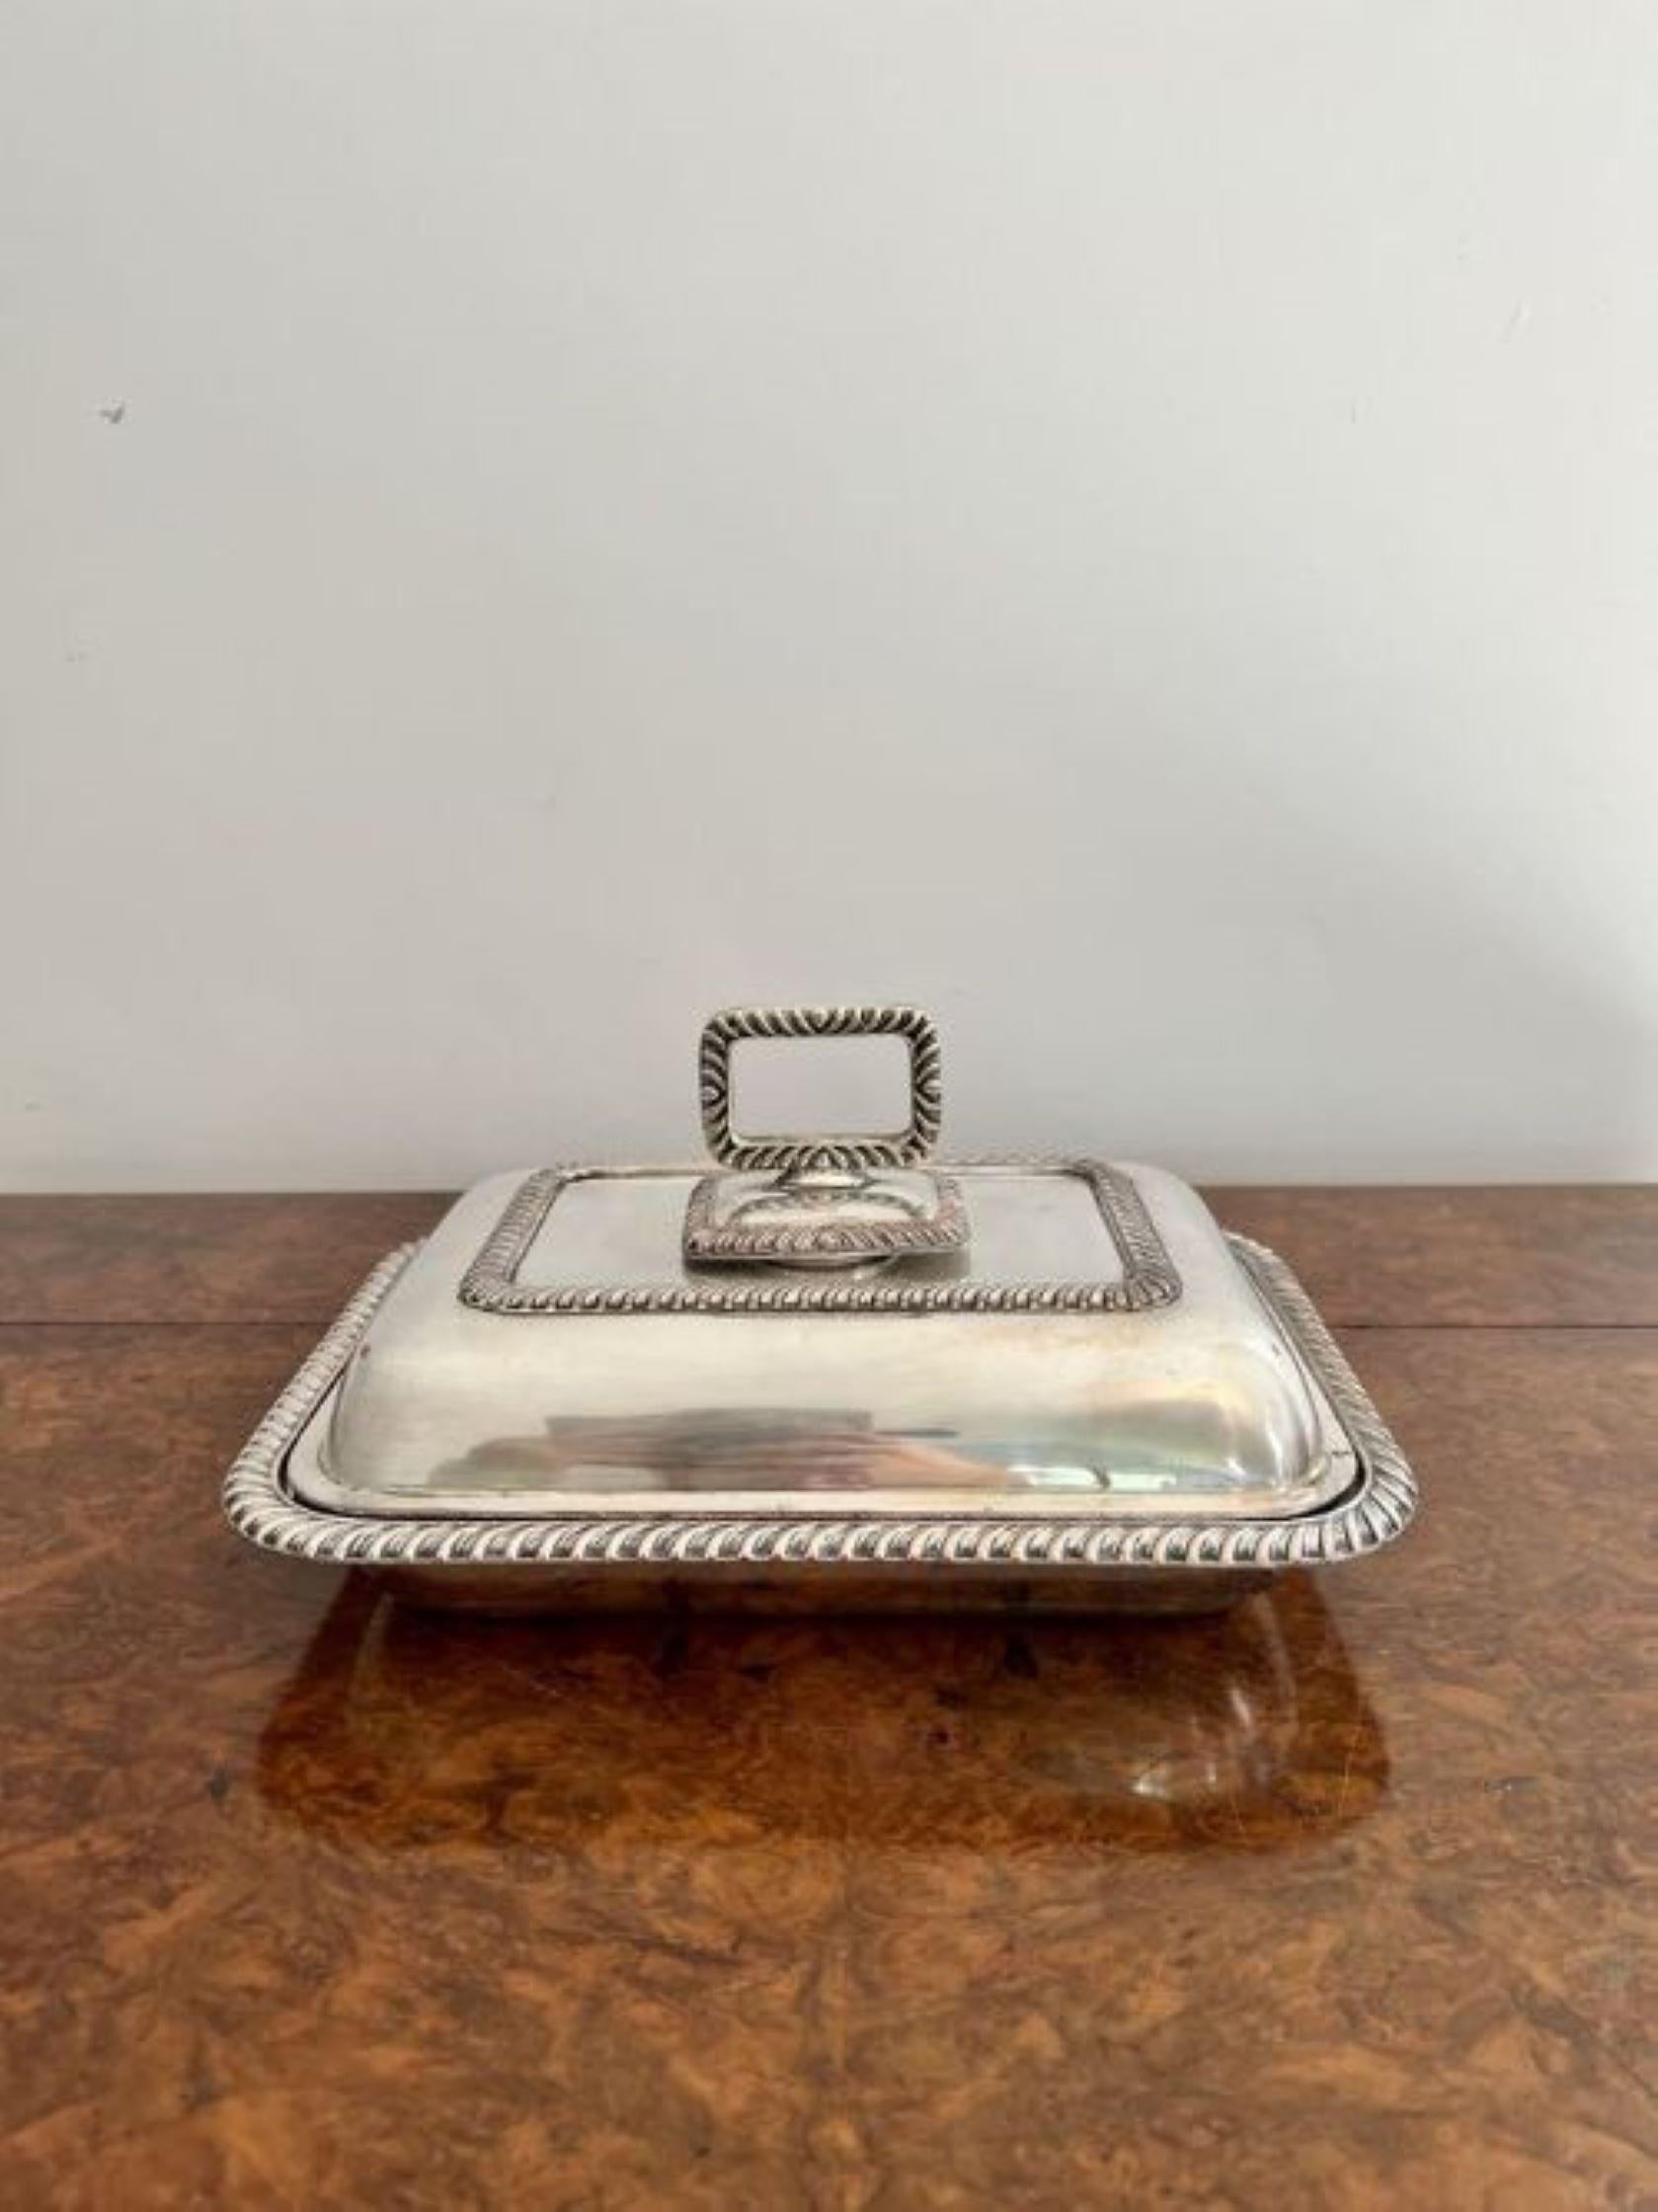 Antique Edwardian quality silver plated rectangle entrée dish having a quality rectangle silver plated entrée dish with ornate detail round the rim, a lift off lid with a silver plated ornate handle to the top.